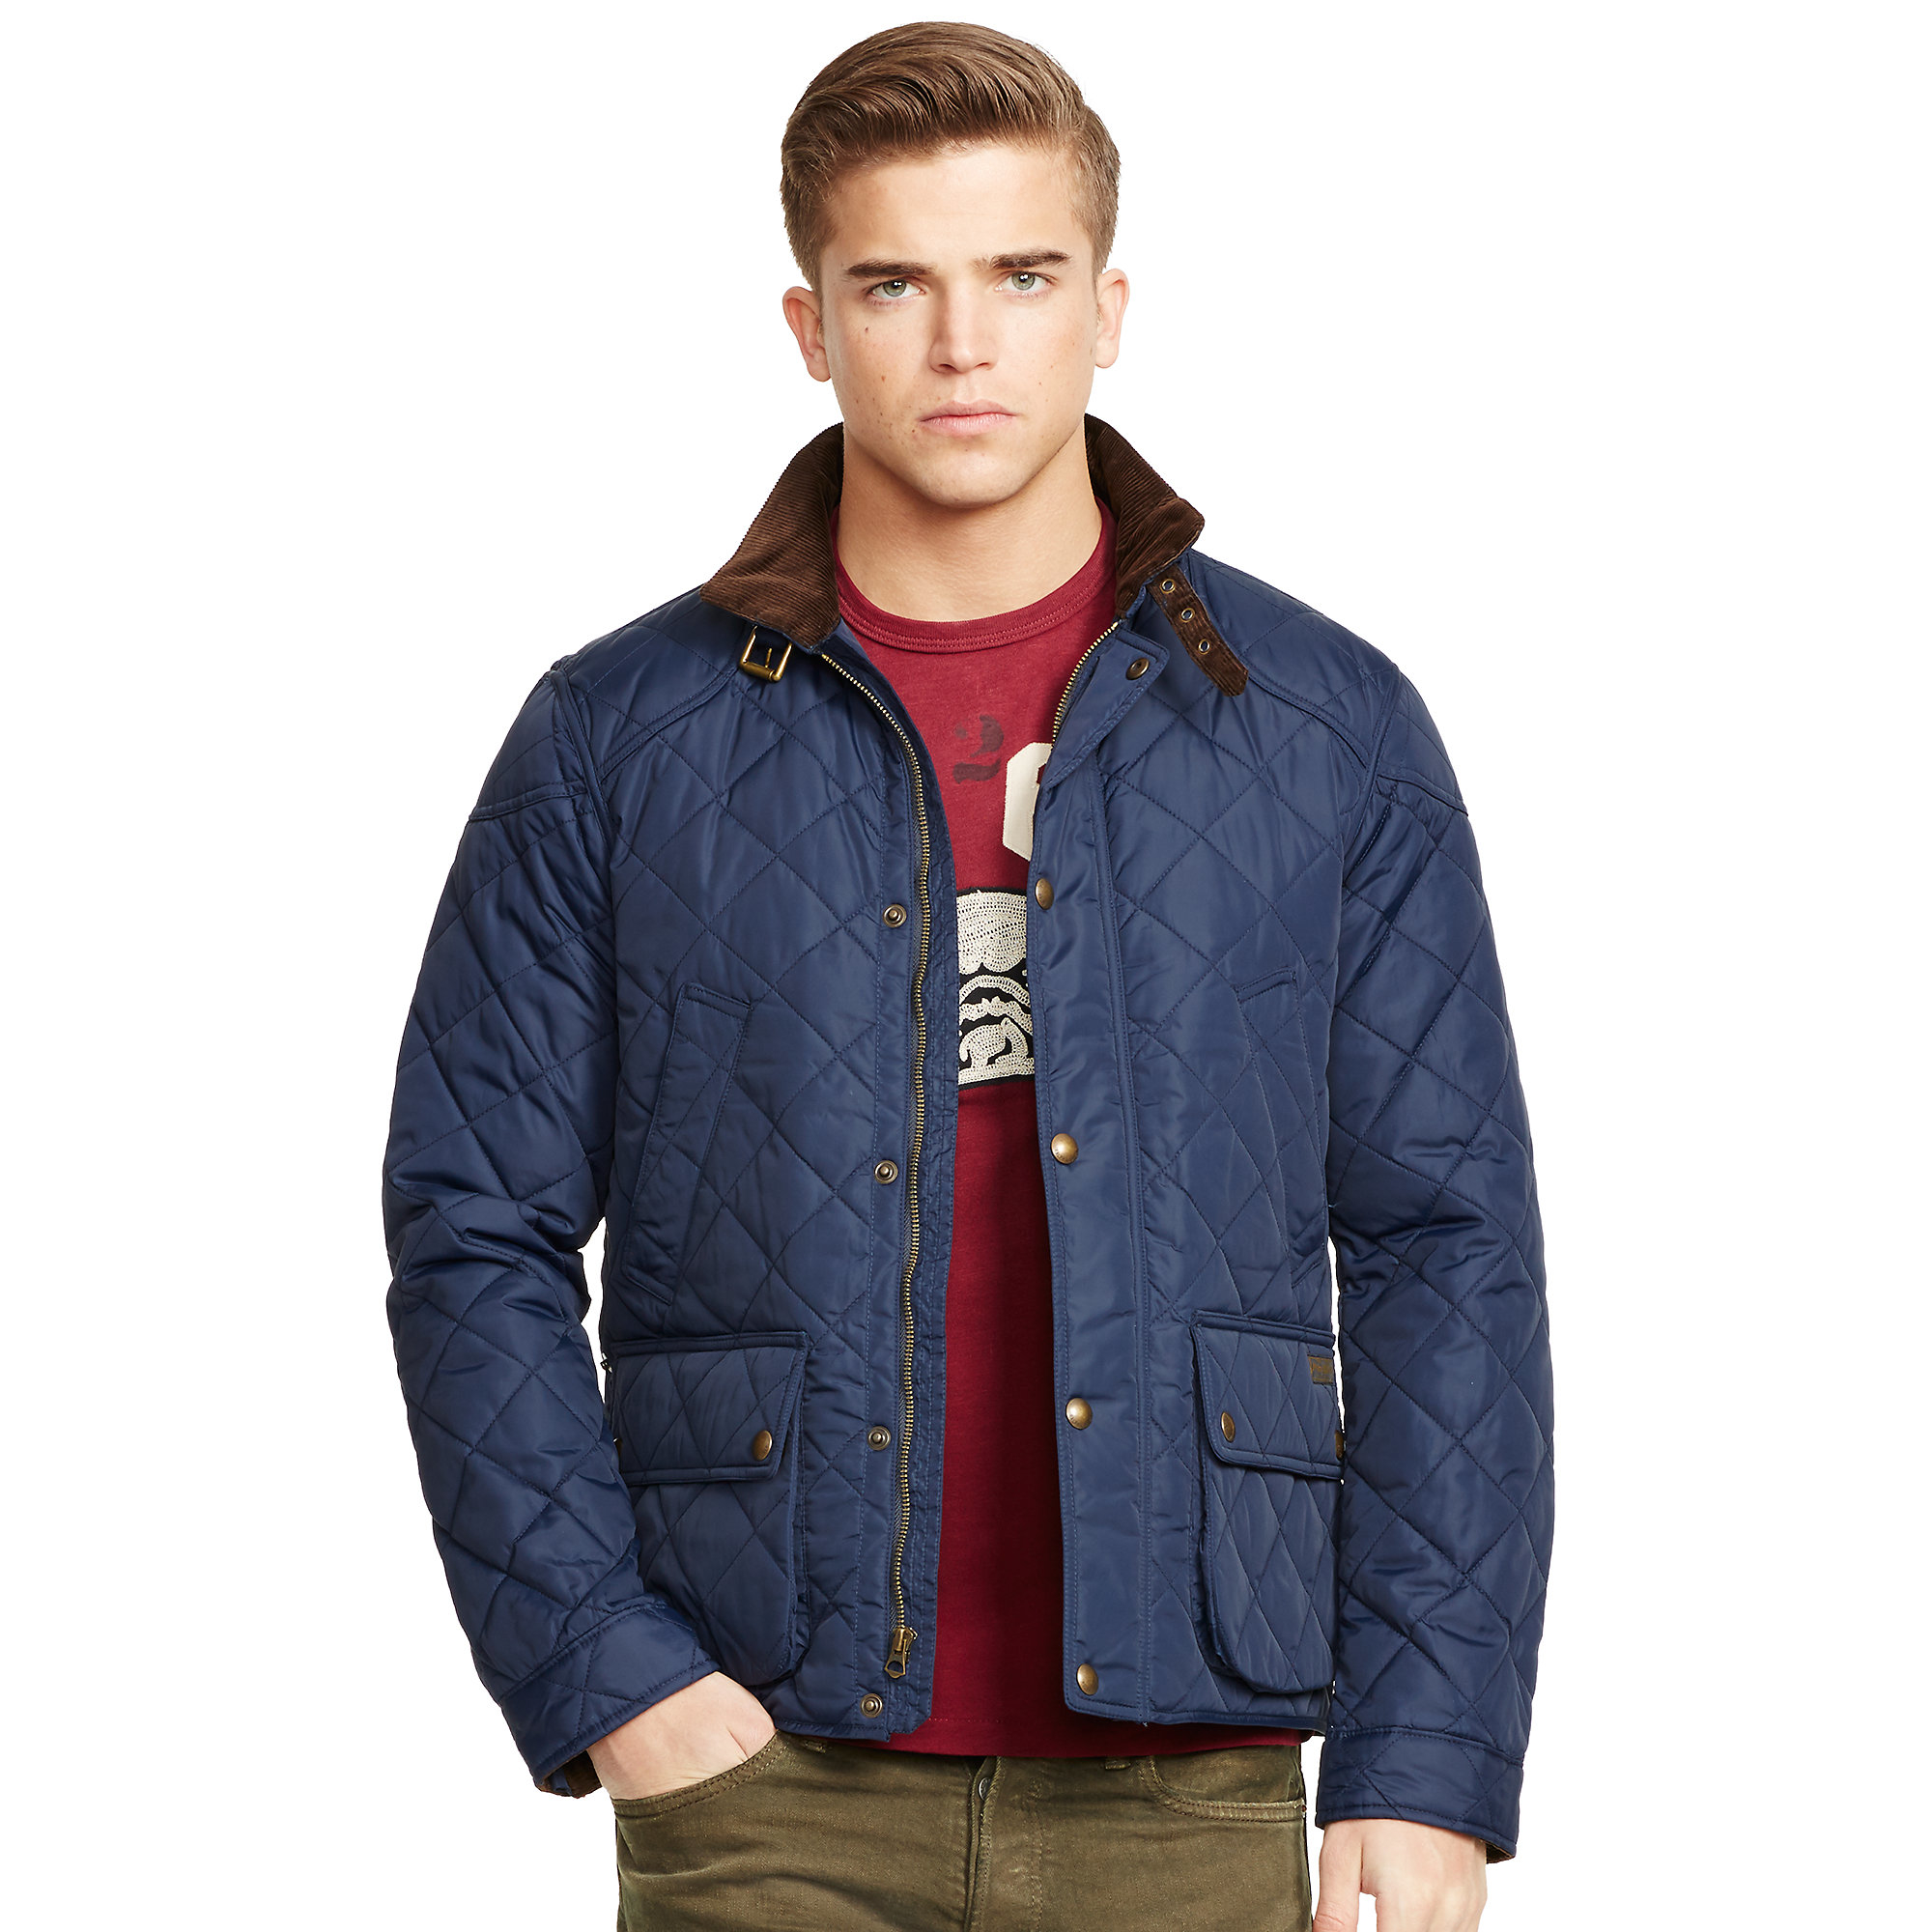 Polo Ralph Lauren Quilted Jacket in Blue for Men - Lyst